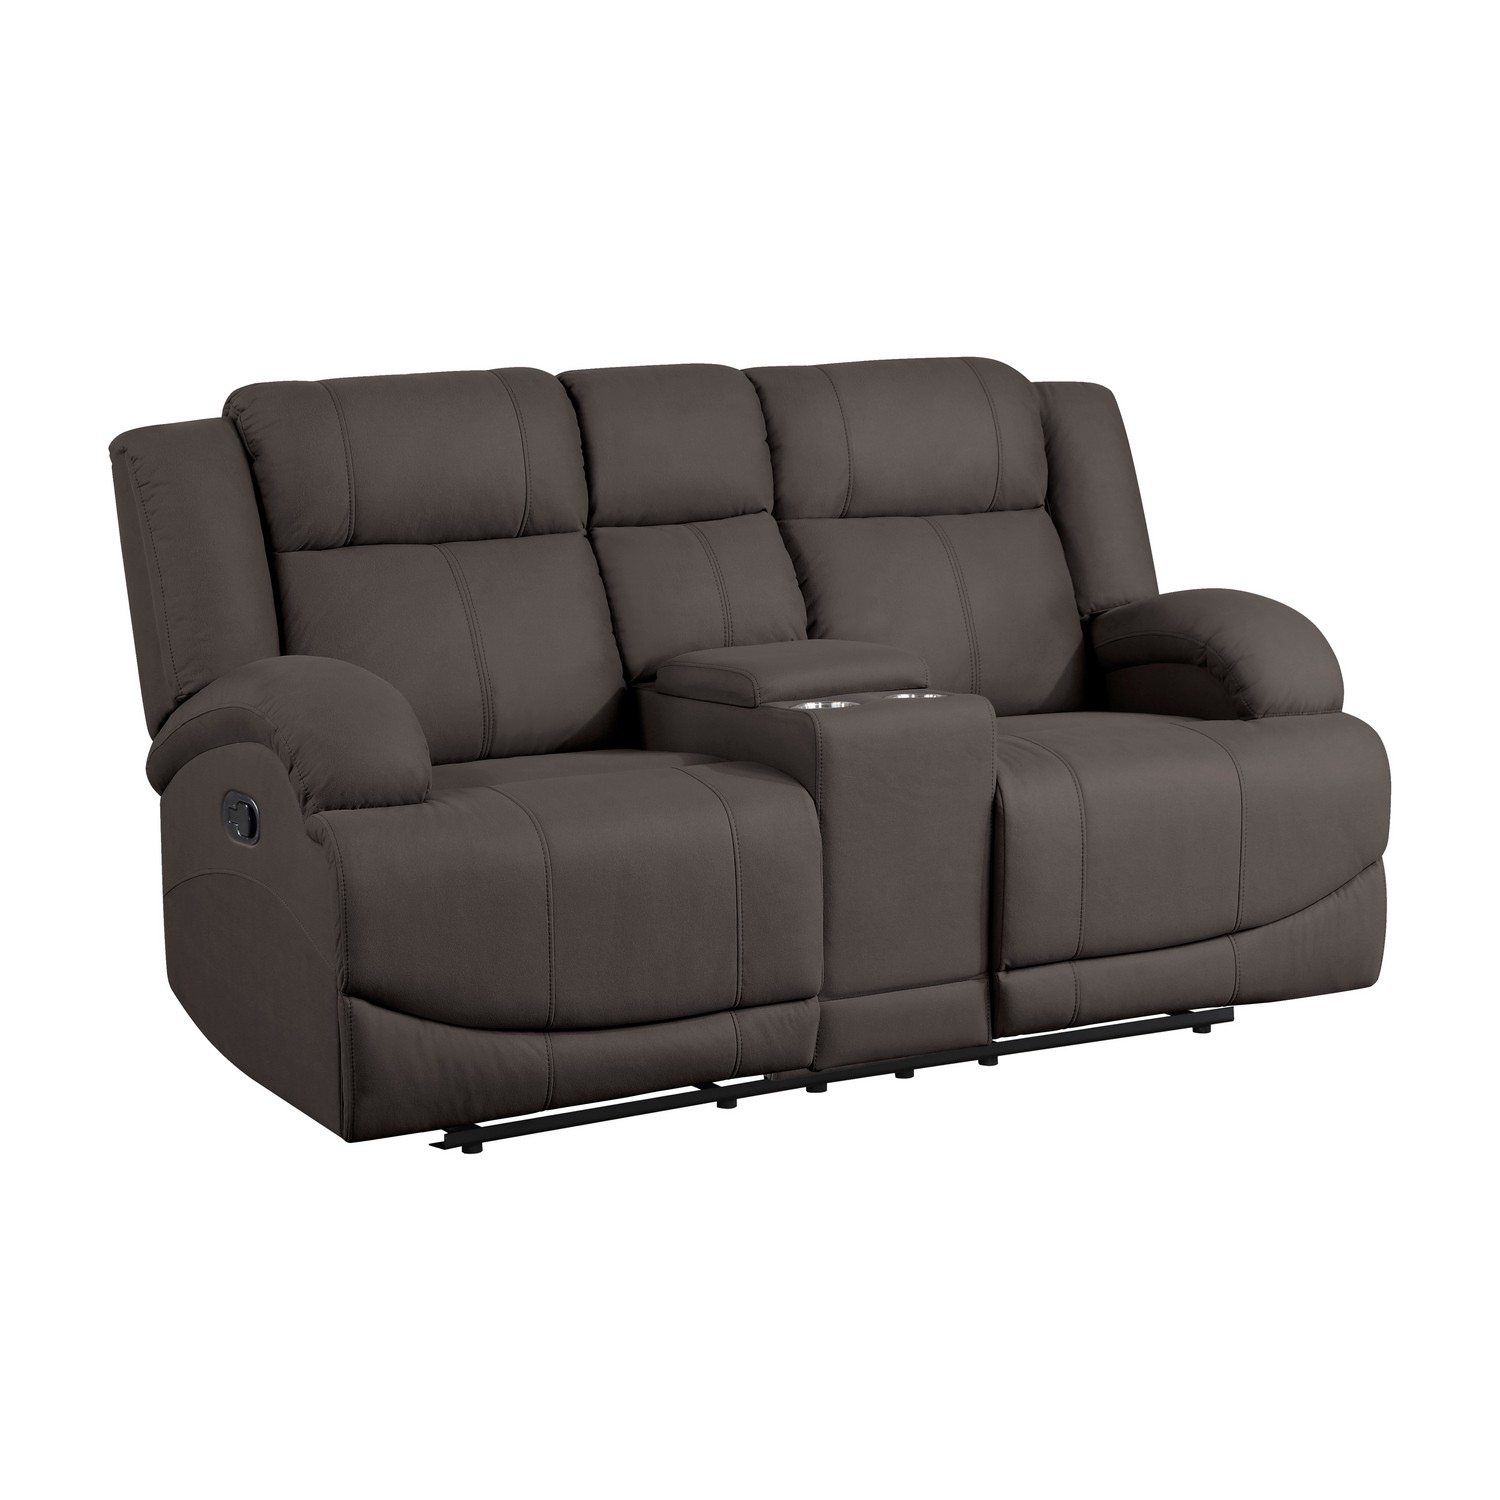 Homelegance Camryn Double Reclining Love Seat - Chocolate